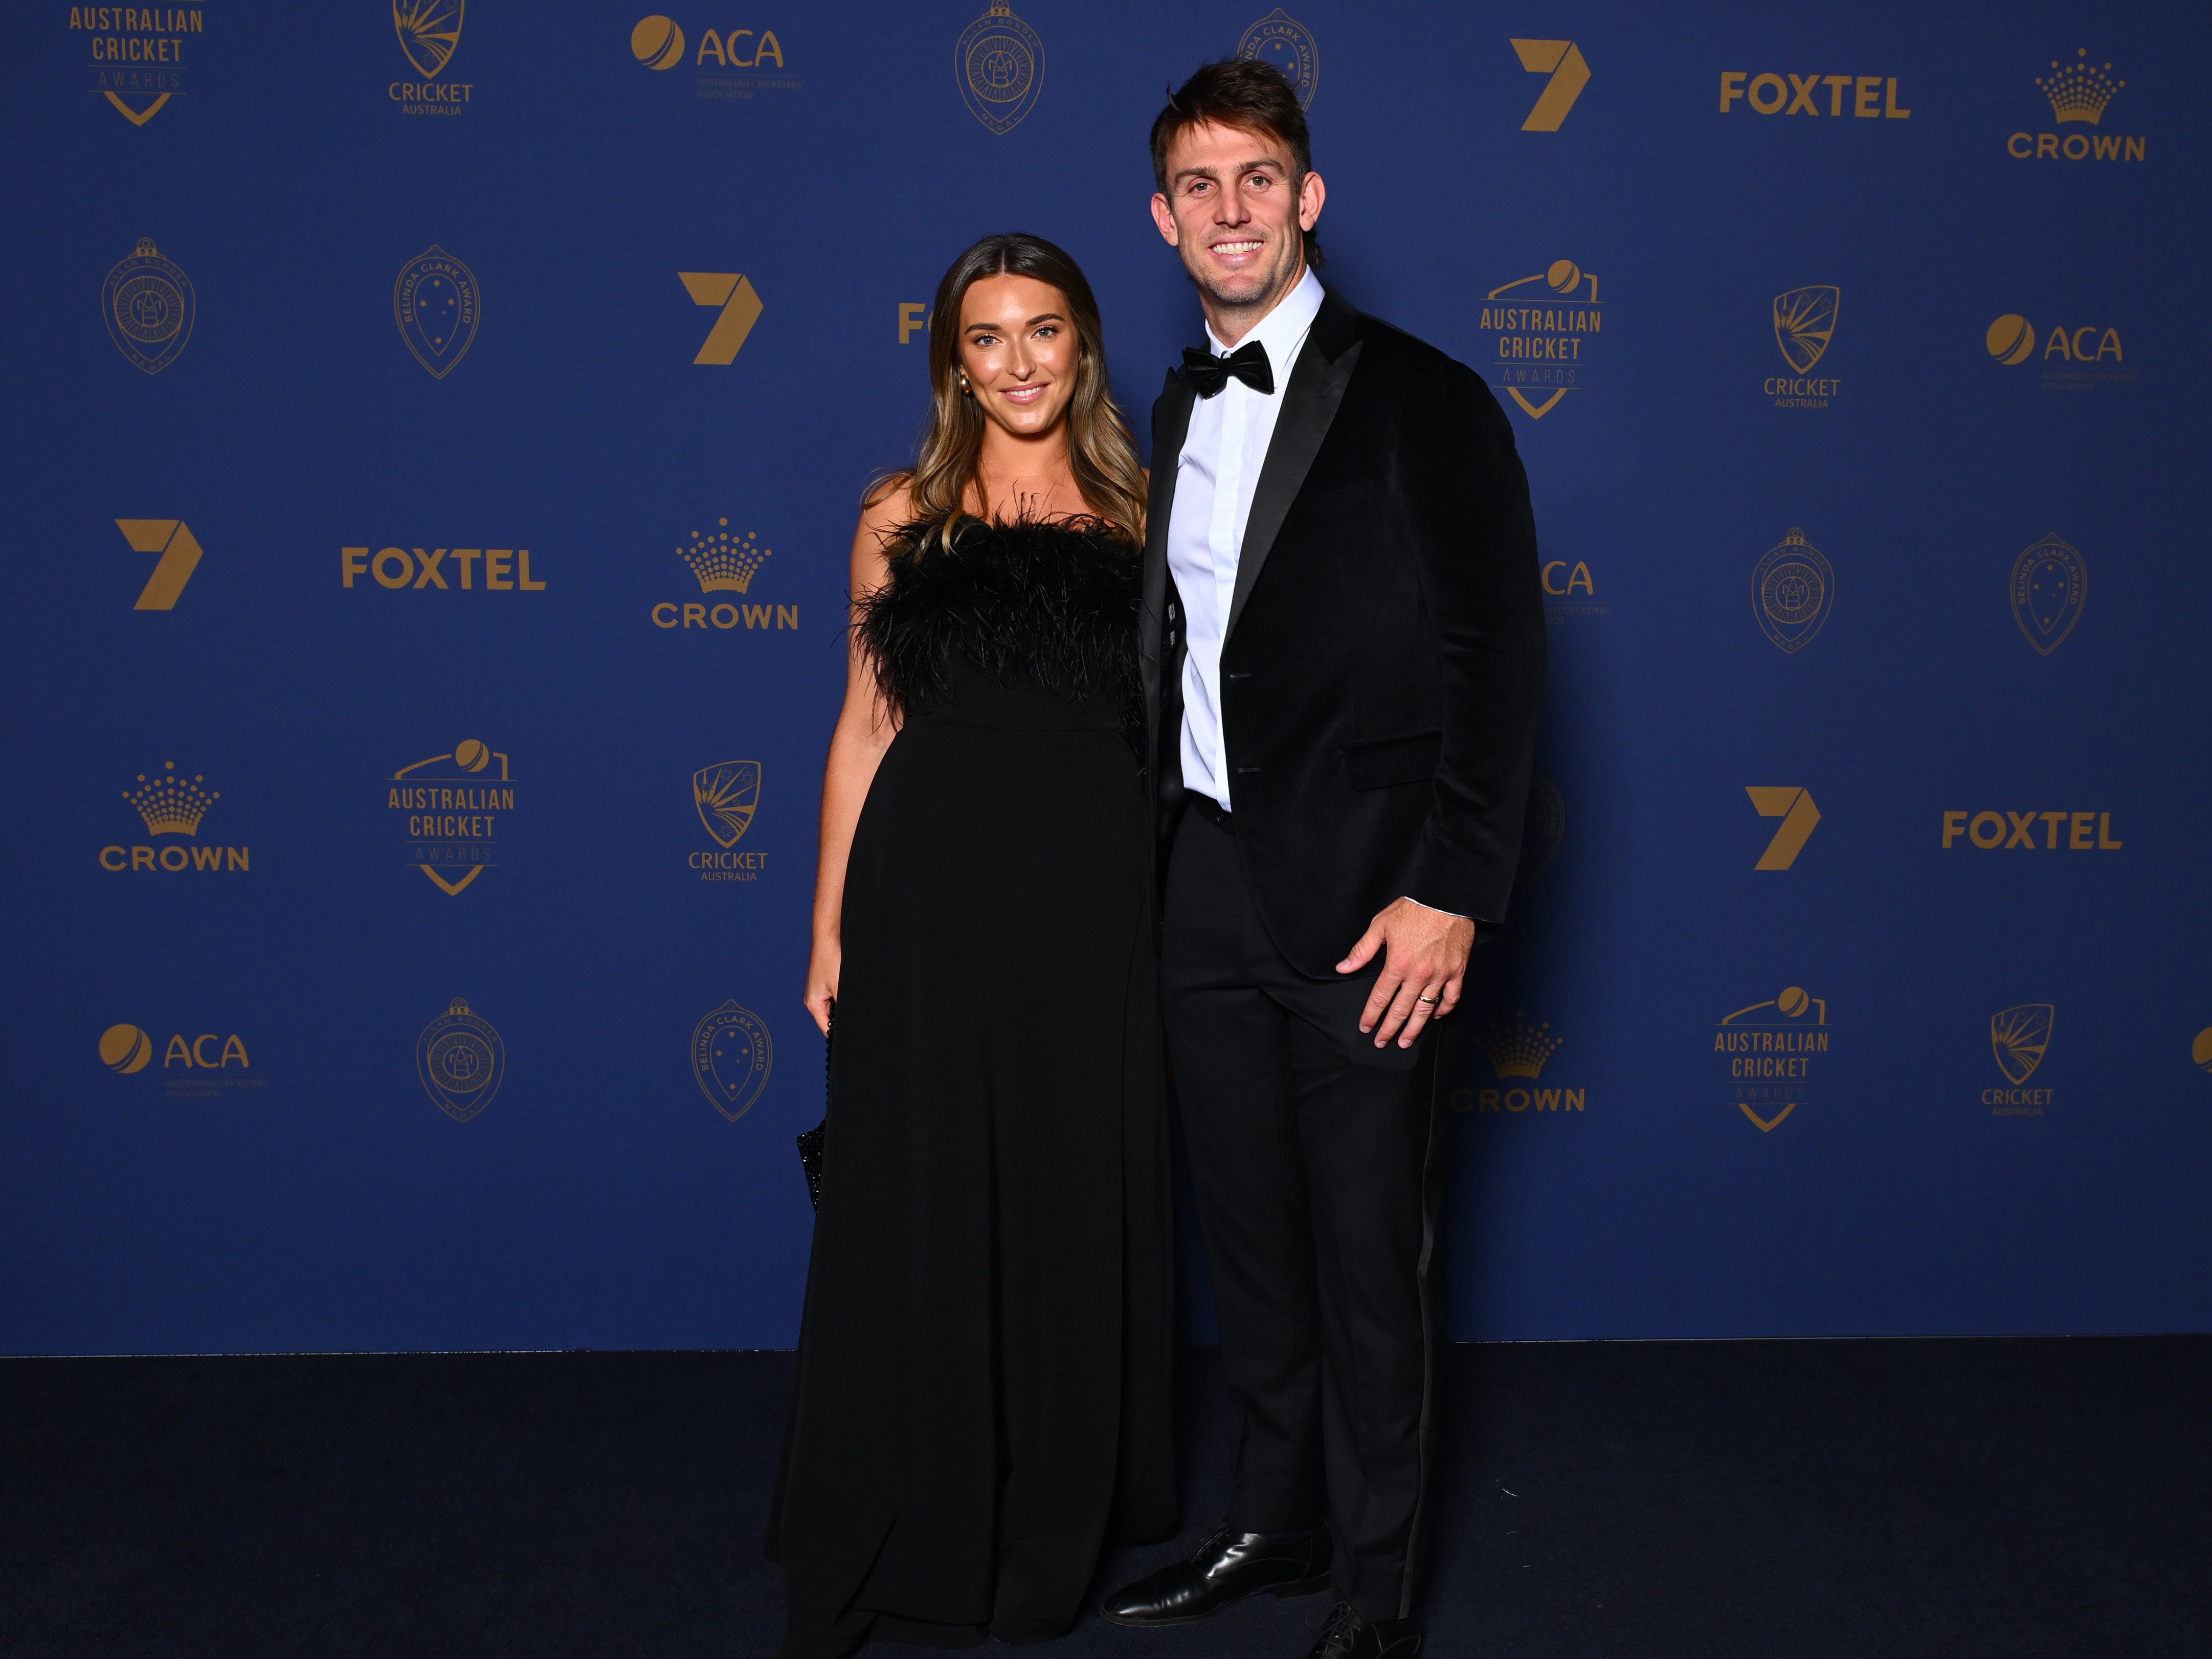 Mitchell Marsh with wife Greta at the awards ceremony in Melbourne